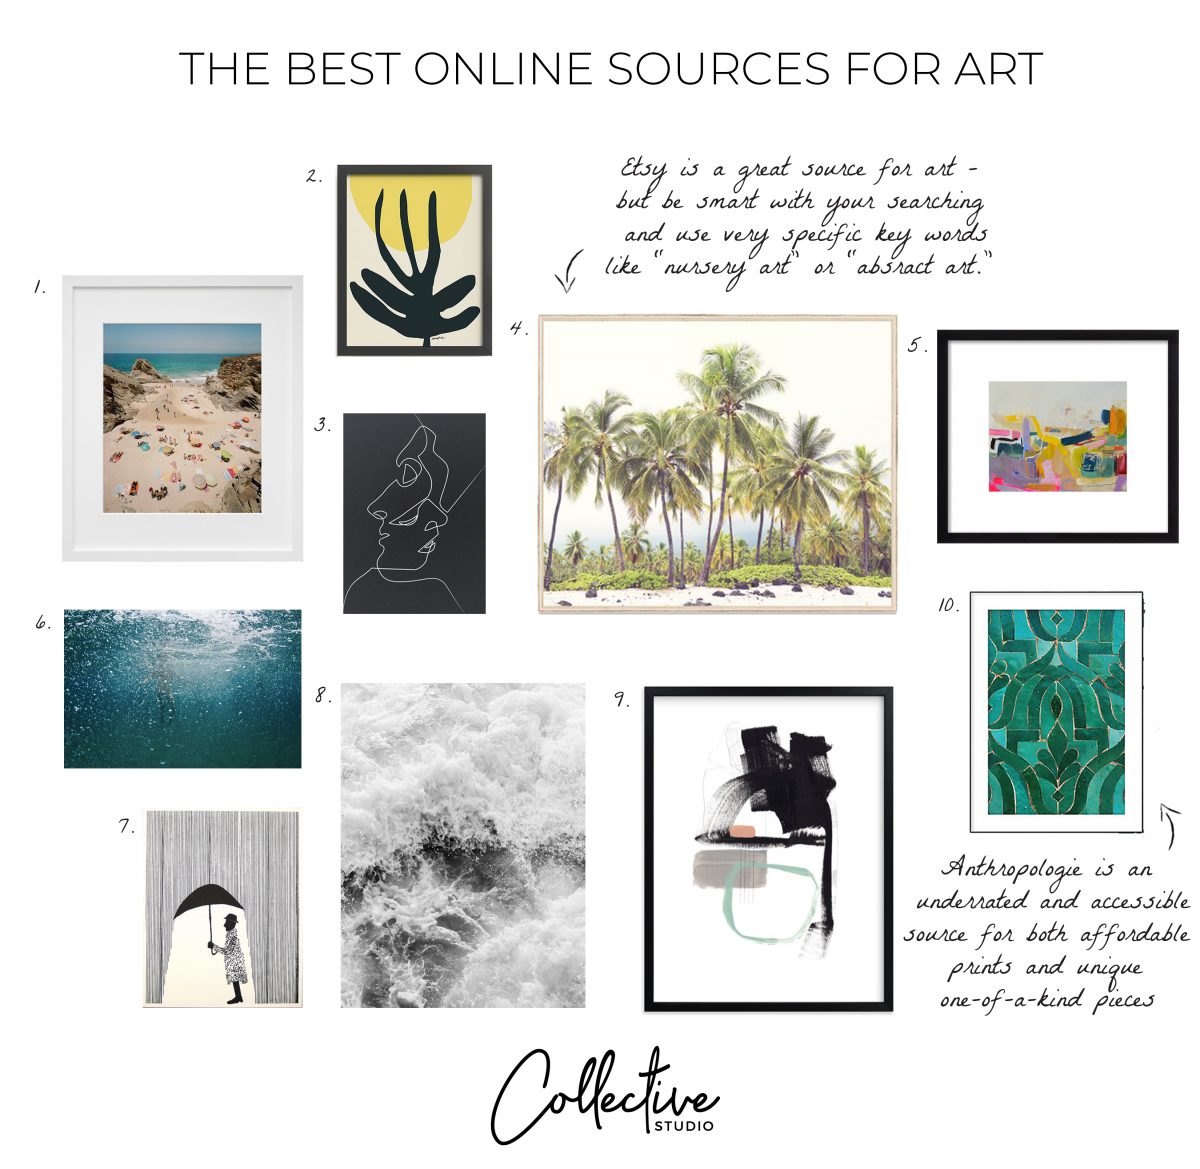 10 Things: The Best Online Sources for Art